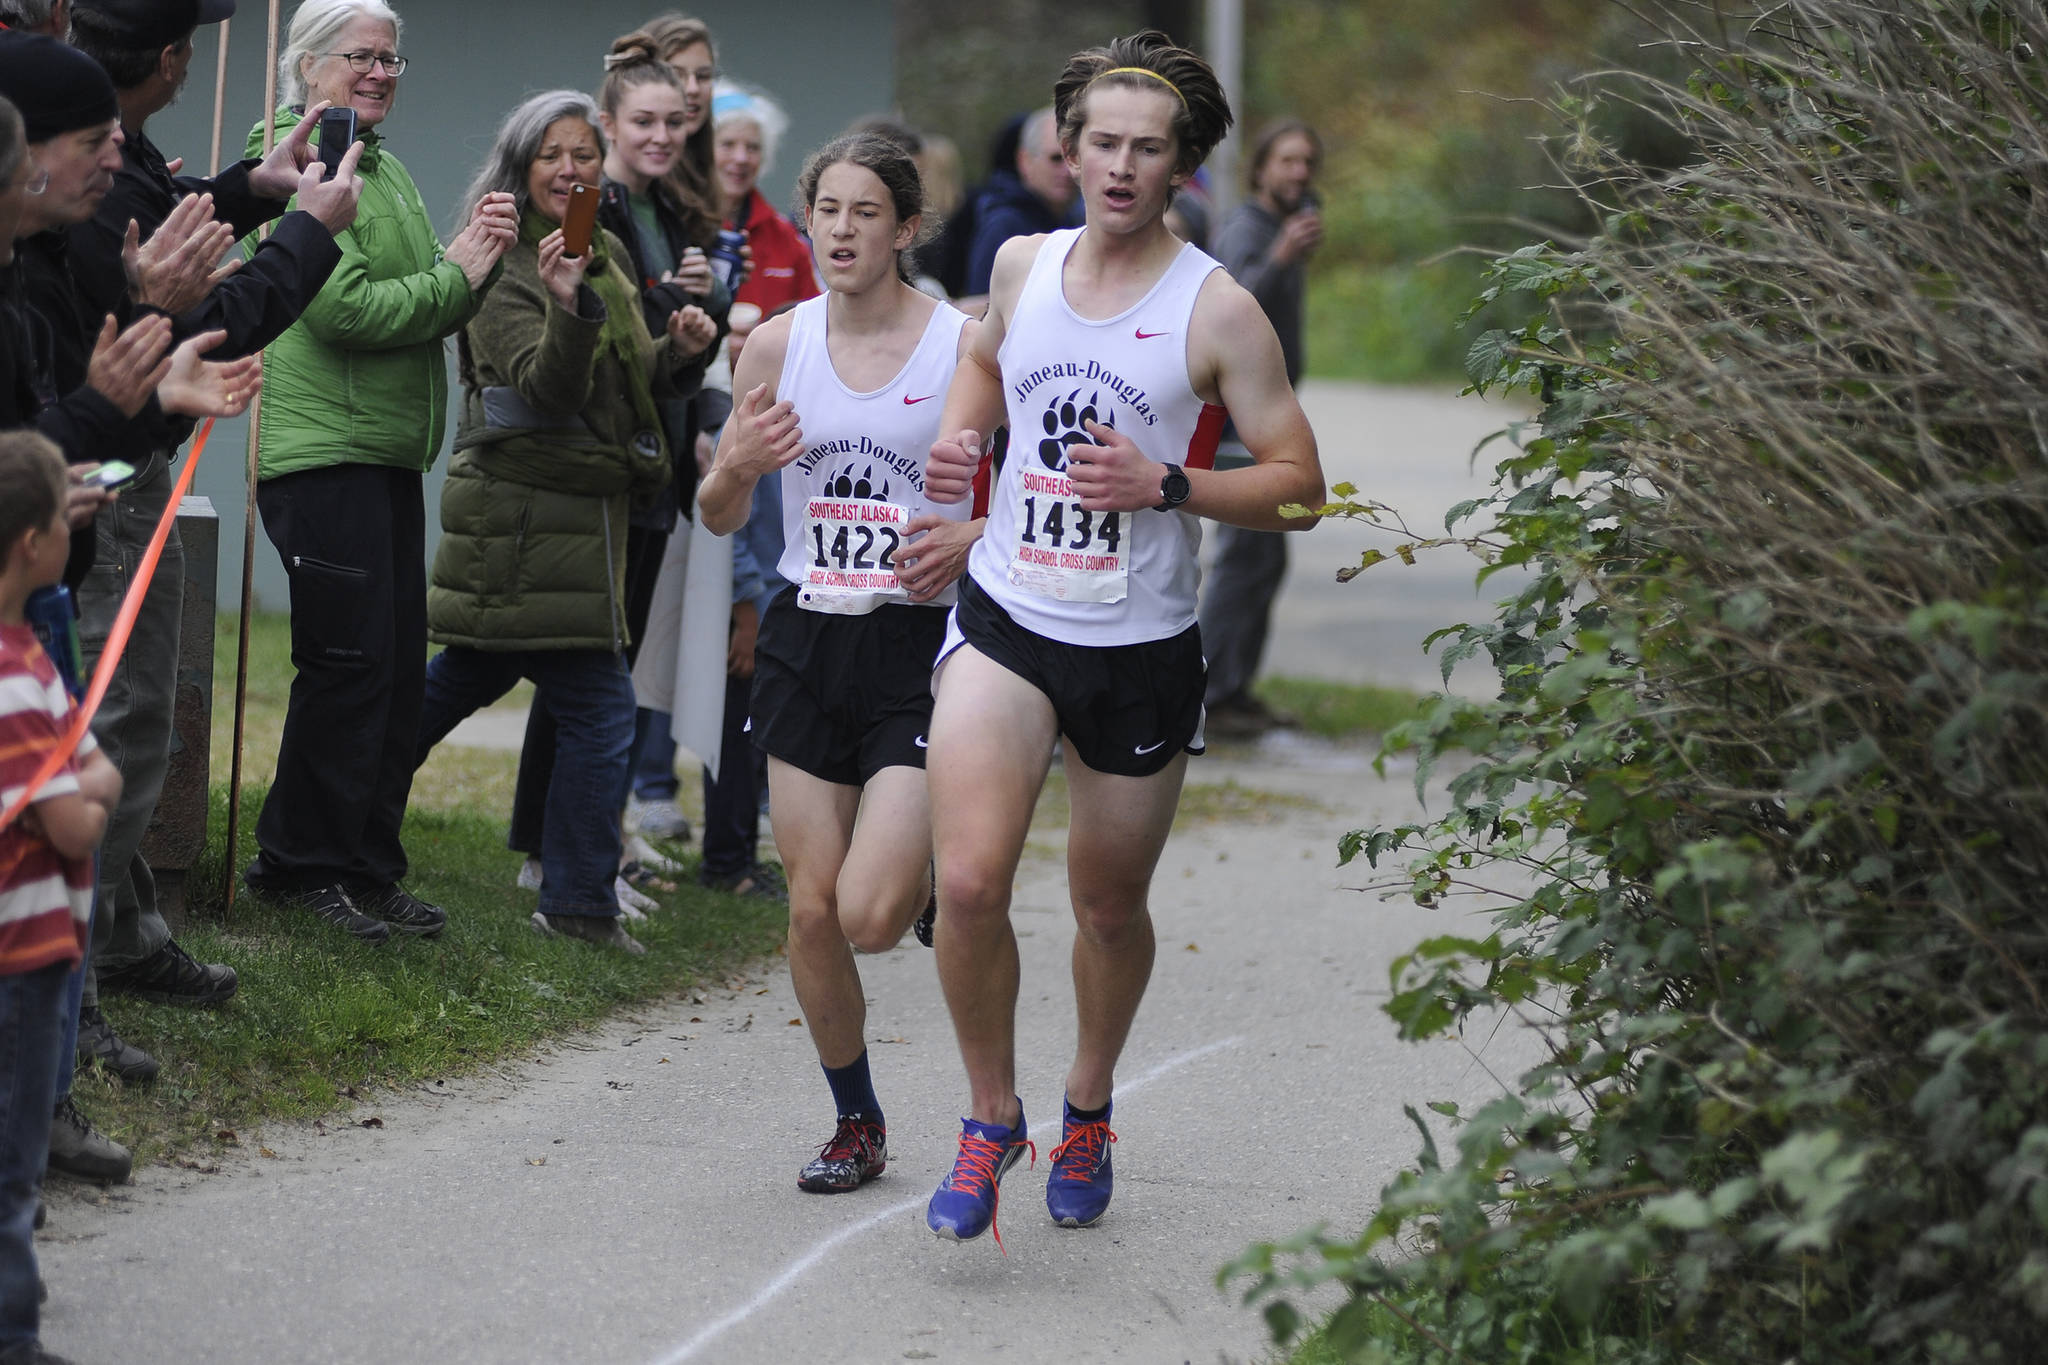 Juneau-Douglas’ Clem Taylor-Roth, right, and Ambrose Bucy, race toward the finish line of the Region V Cross Country Championship meet on Saturday. (Nolin Ainsworth | Juneau Empire)